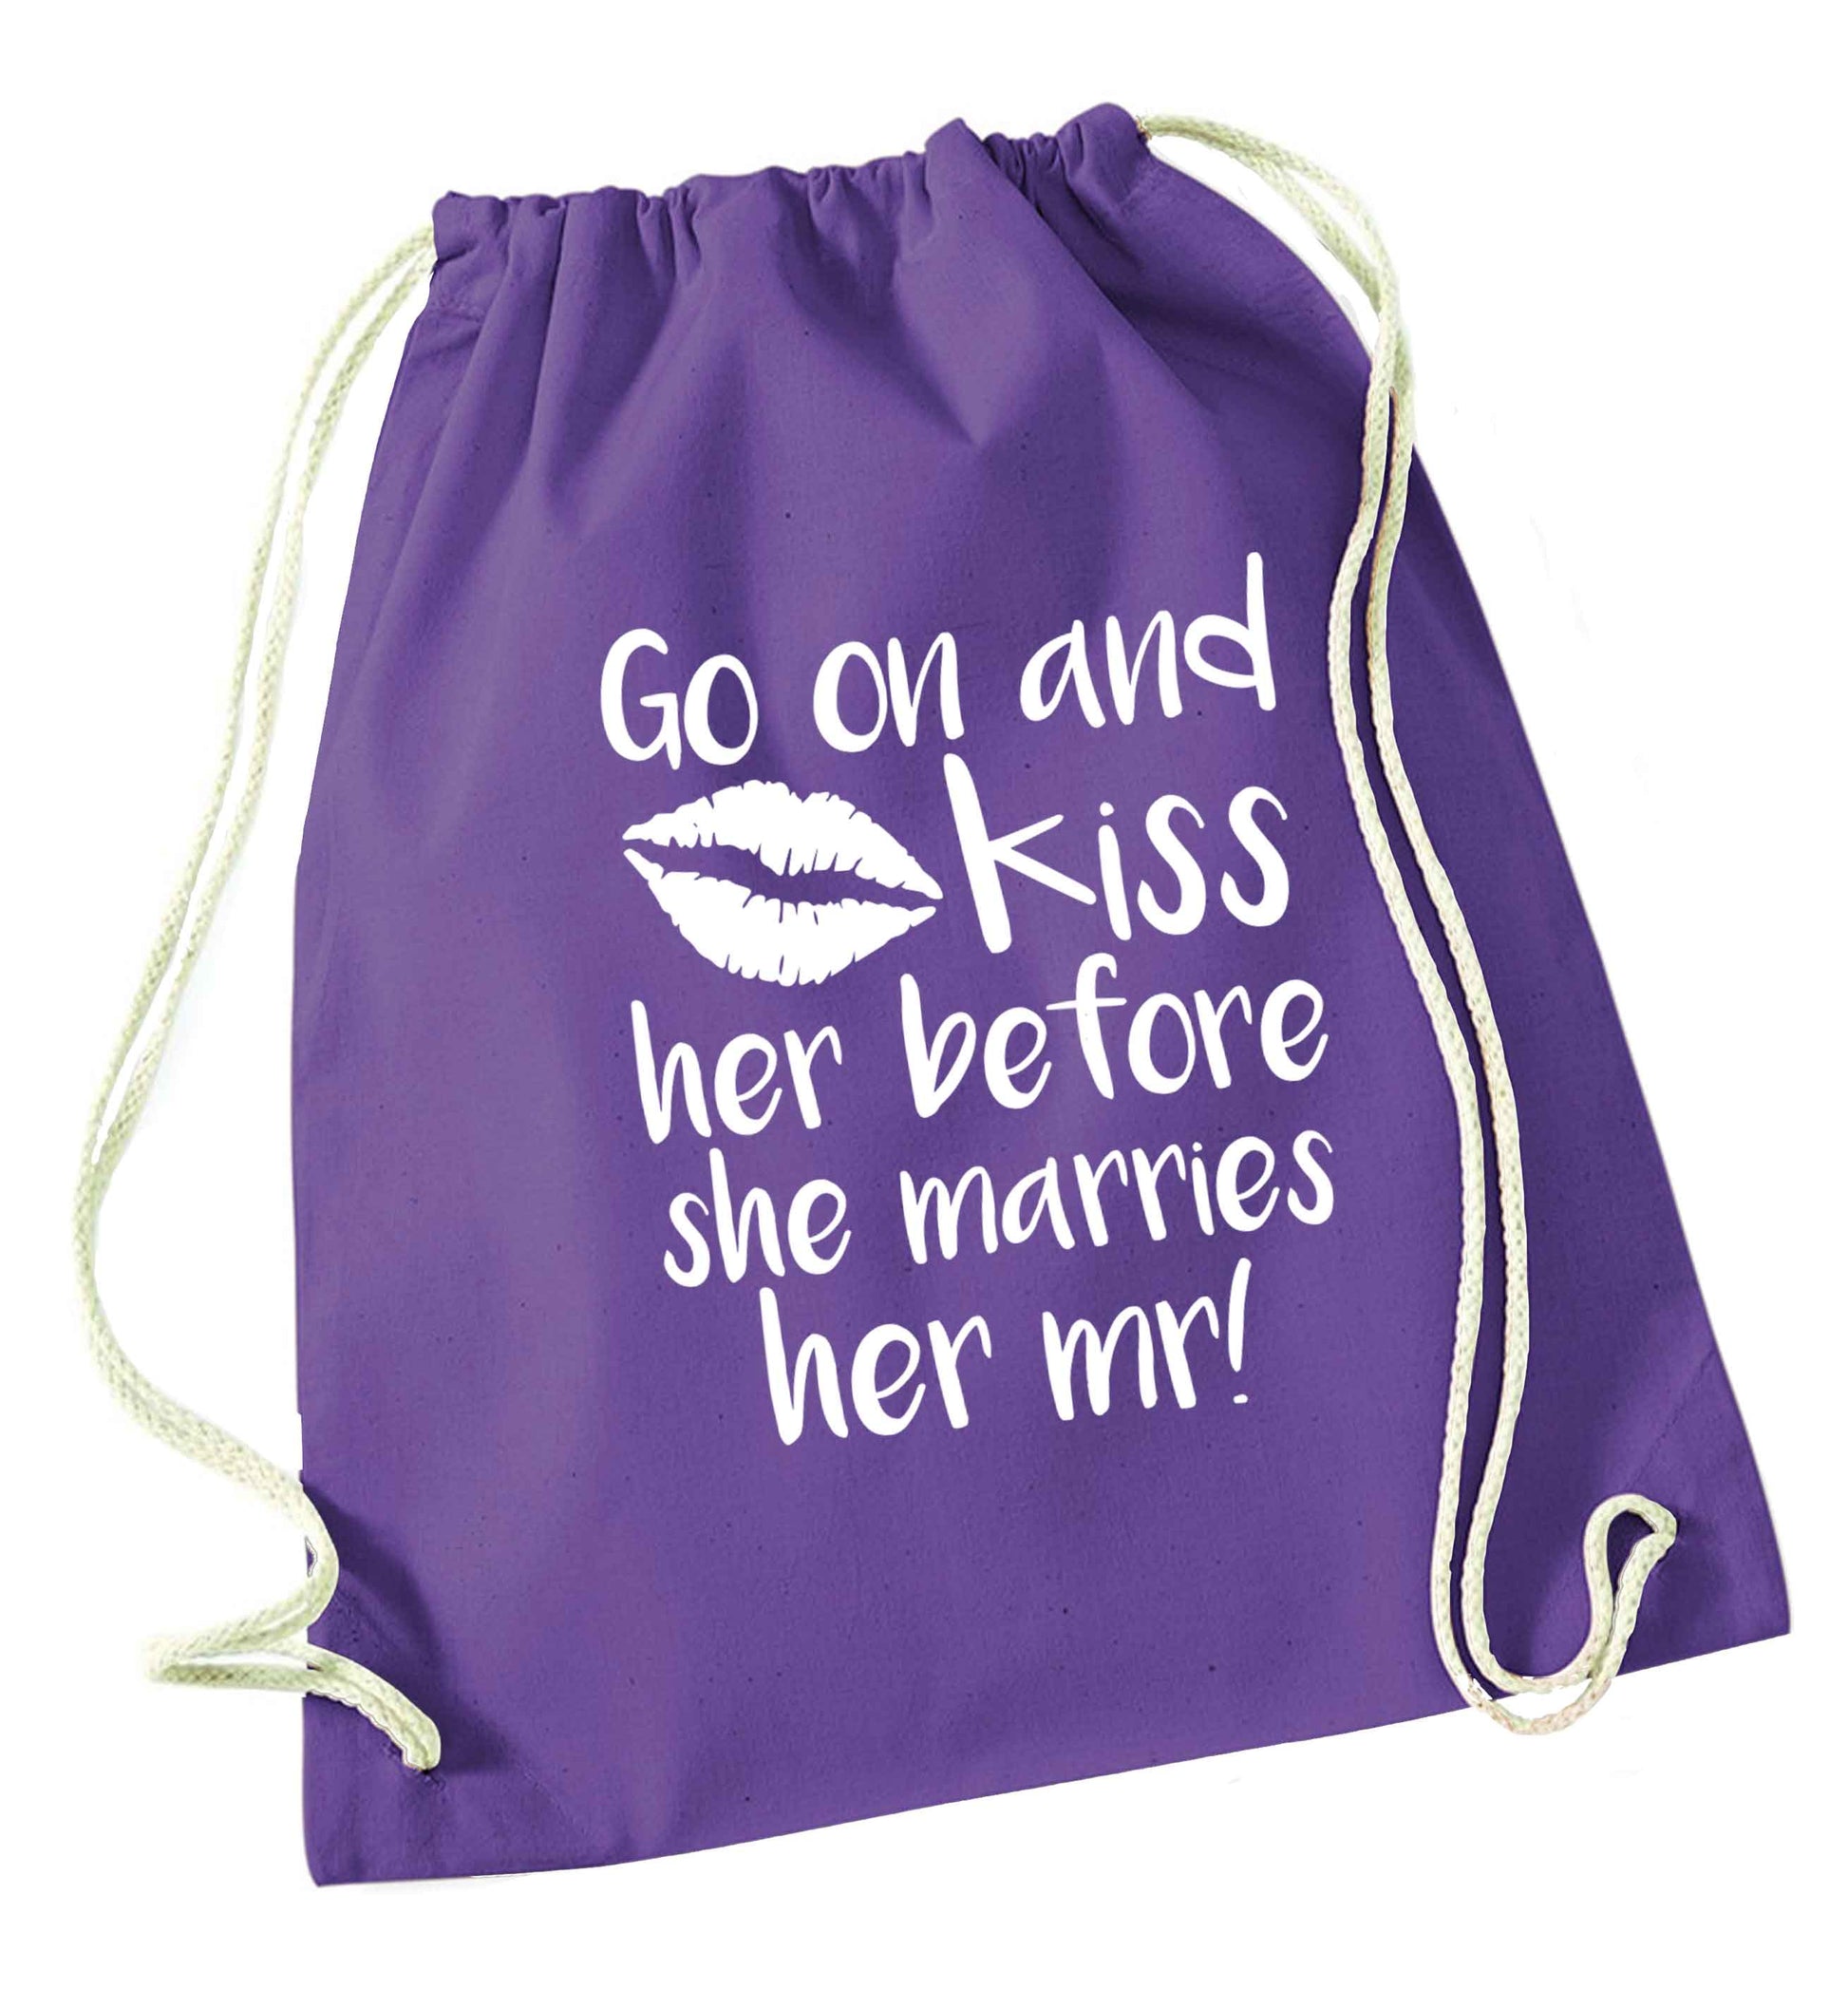 Kiss her before she marries her mr! purple drawstring bag